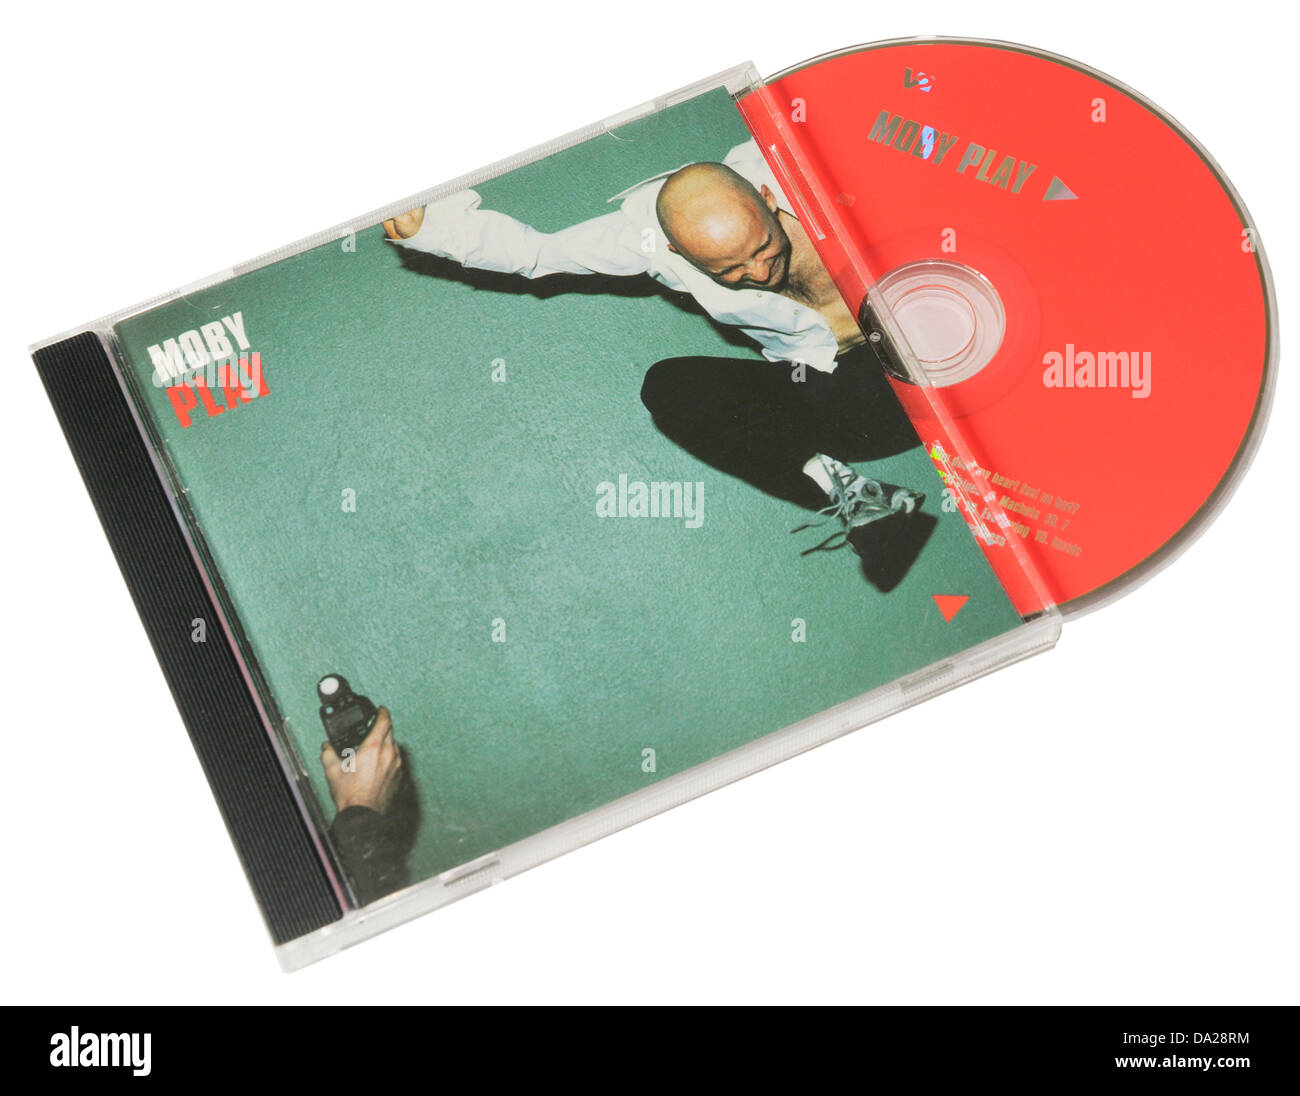 Moby Play album on CD Stock Photo